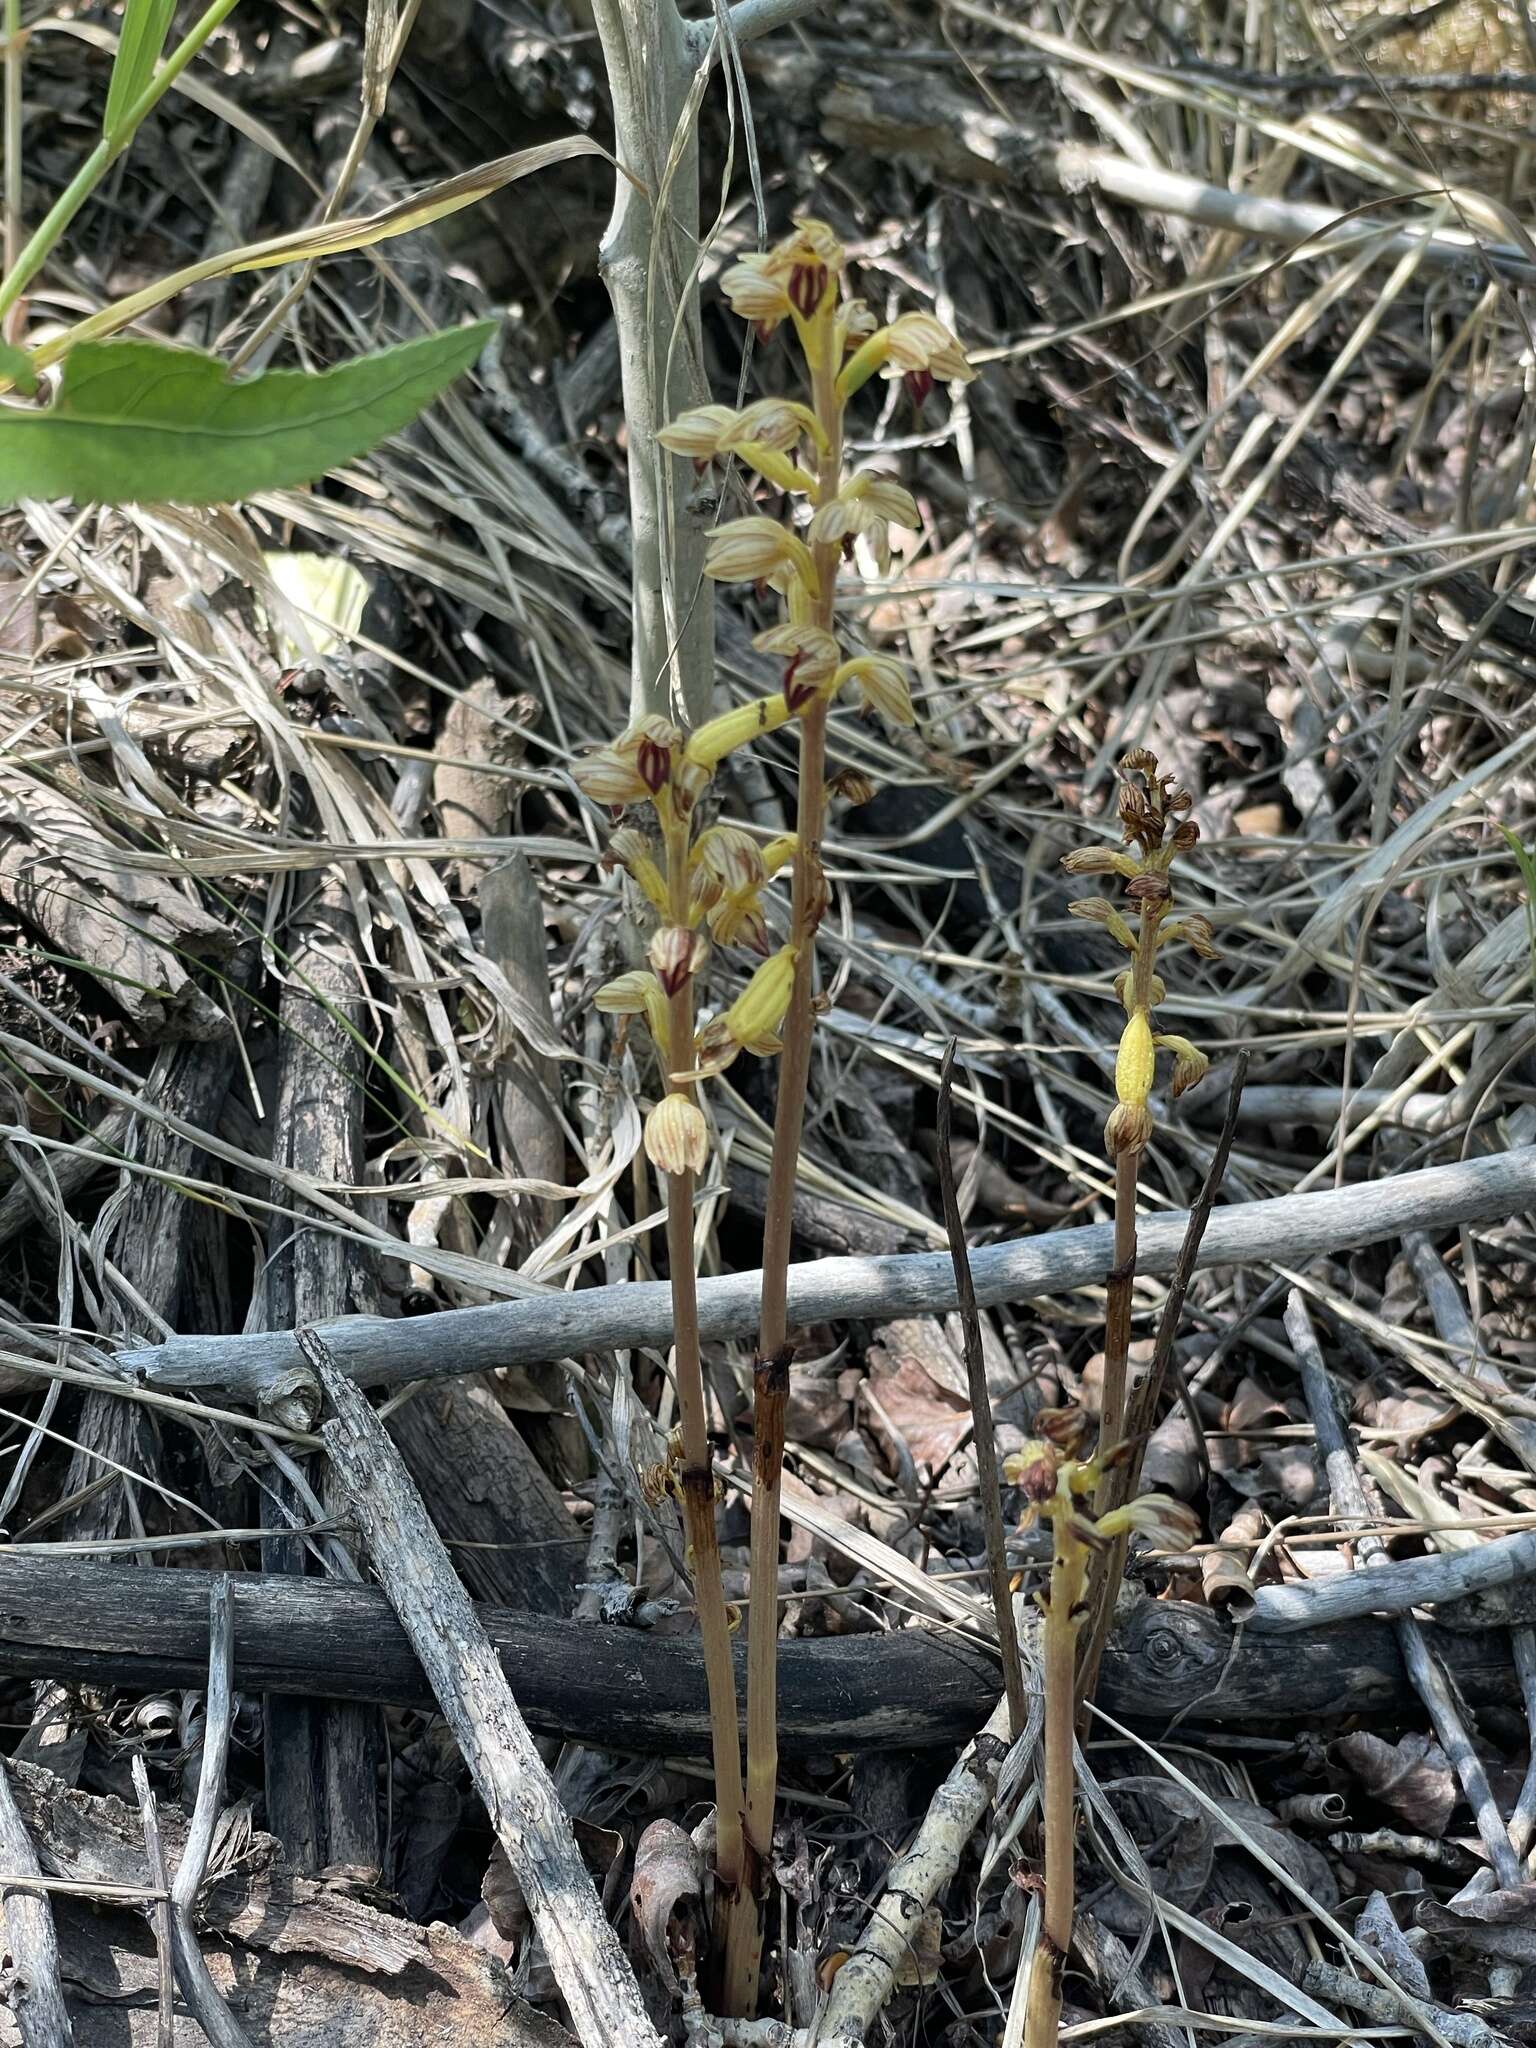 Image of Vreeland's coralroot